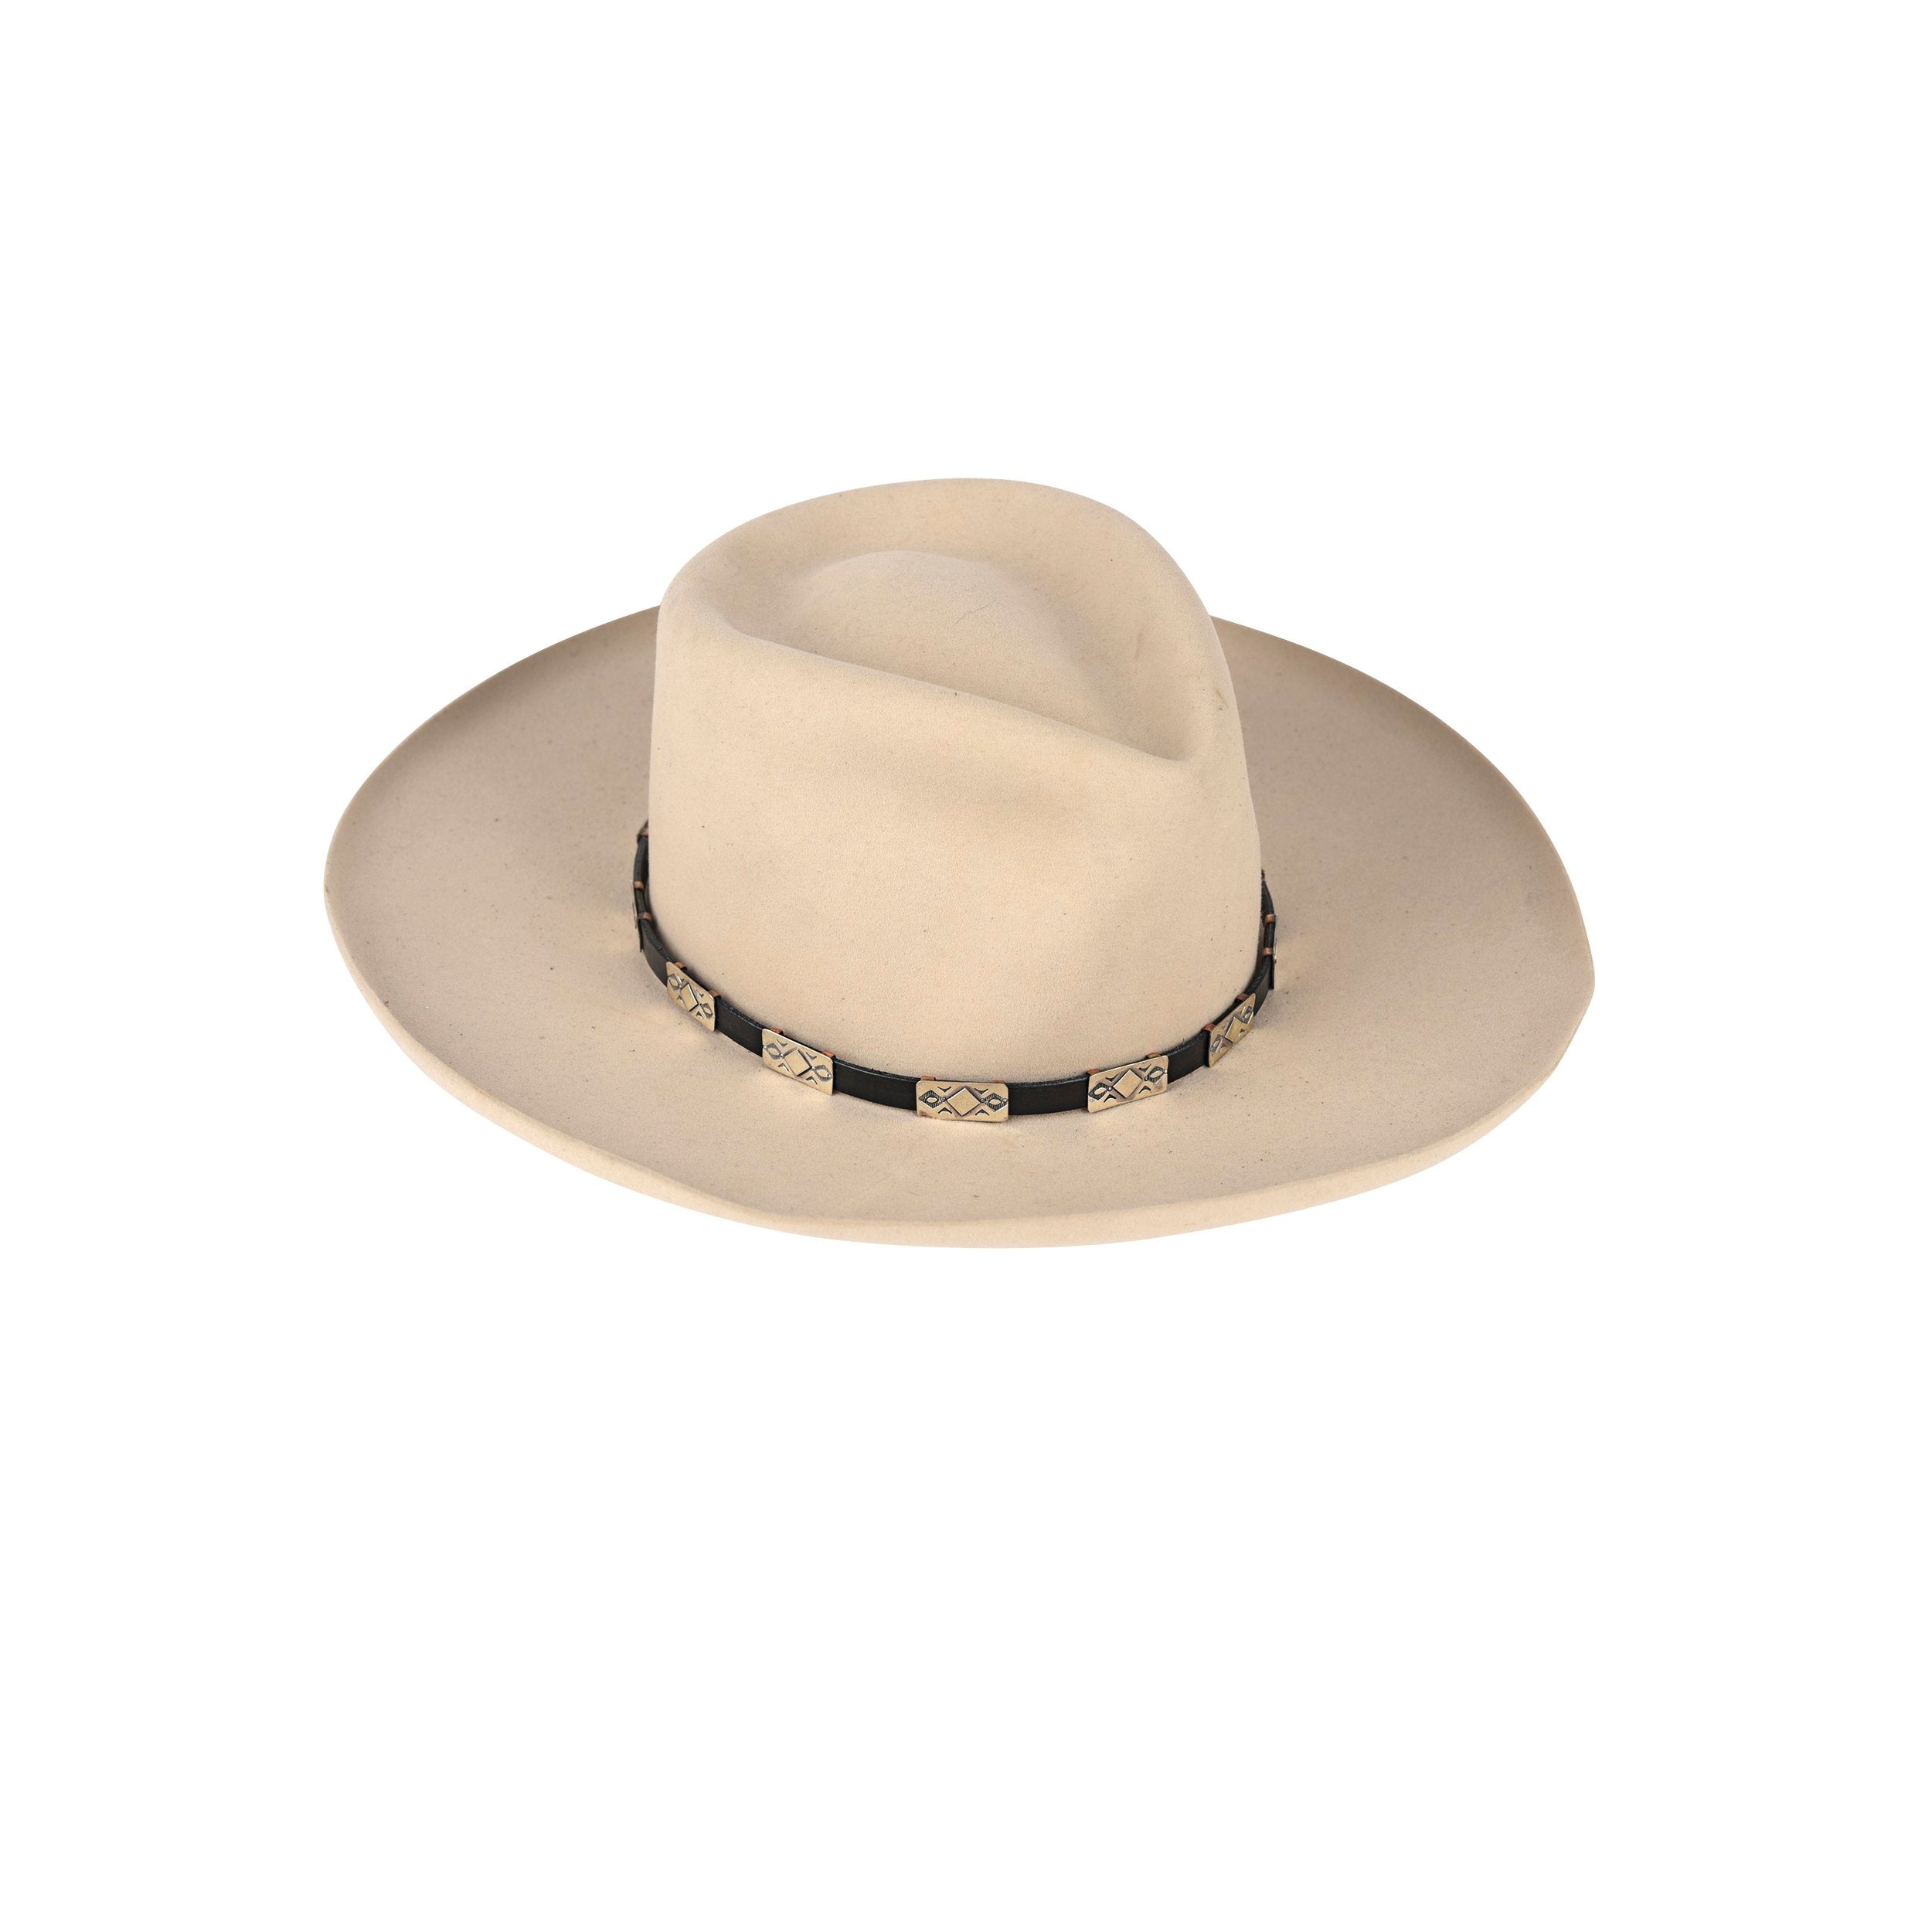 Rick Montano Stamped Concho Hat Band